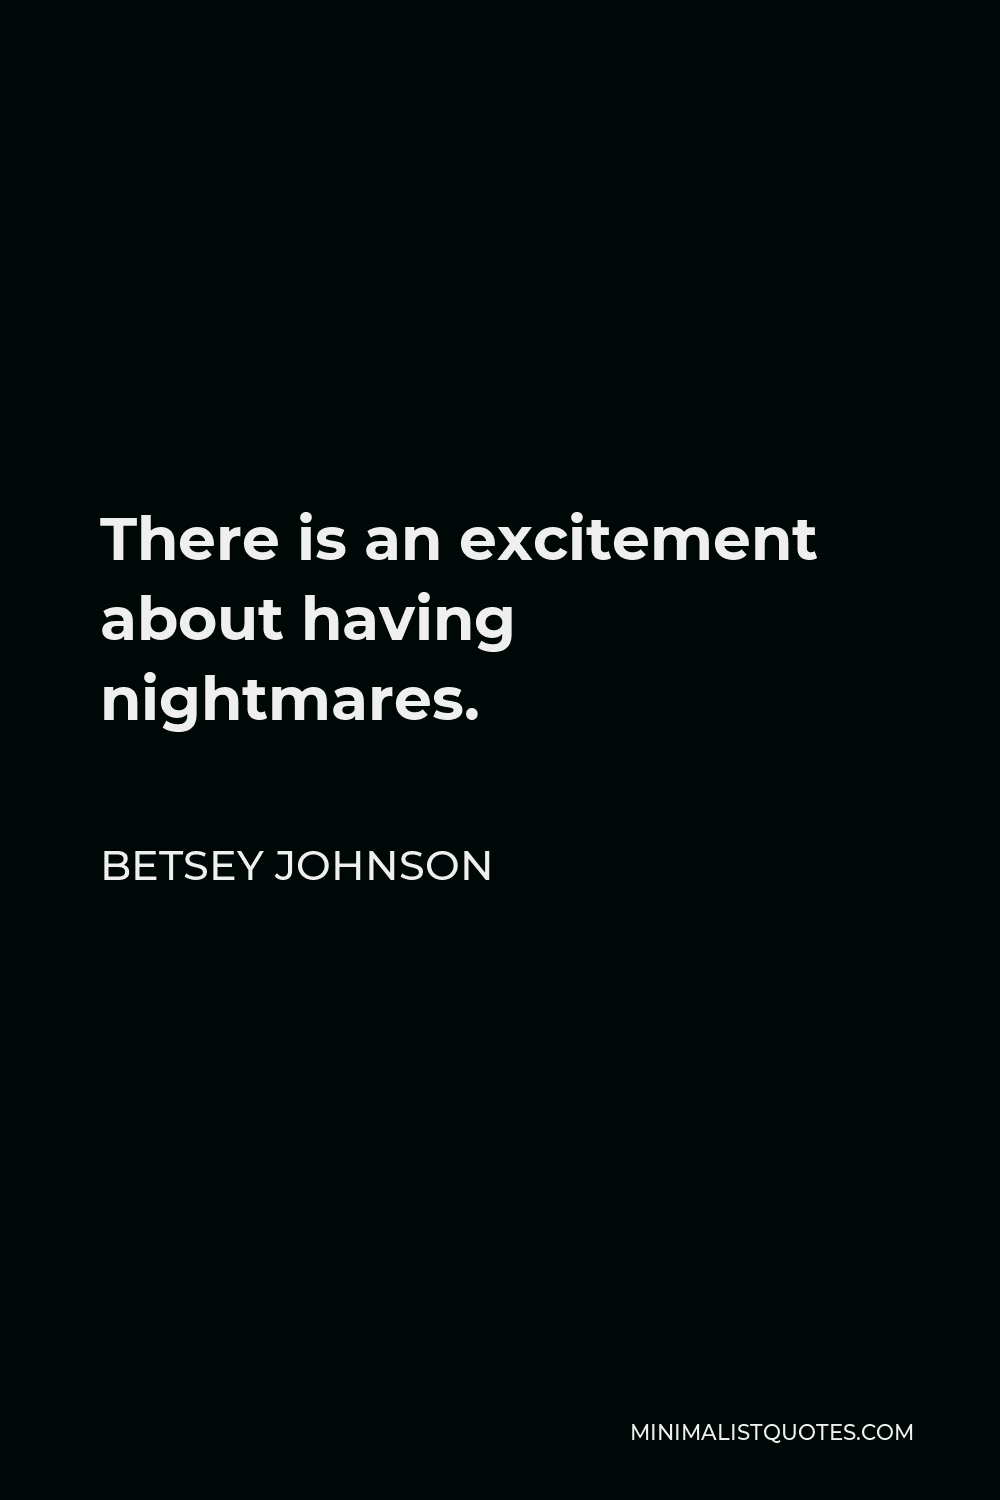 Betsey Johnson Quote - There is an excitement about having nightmares.